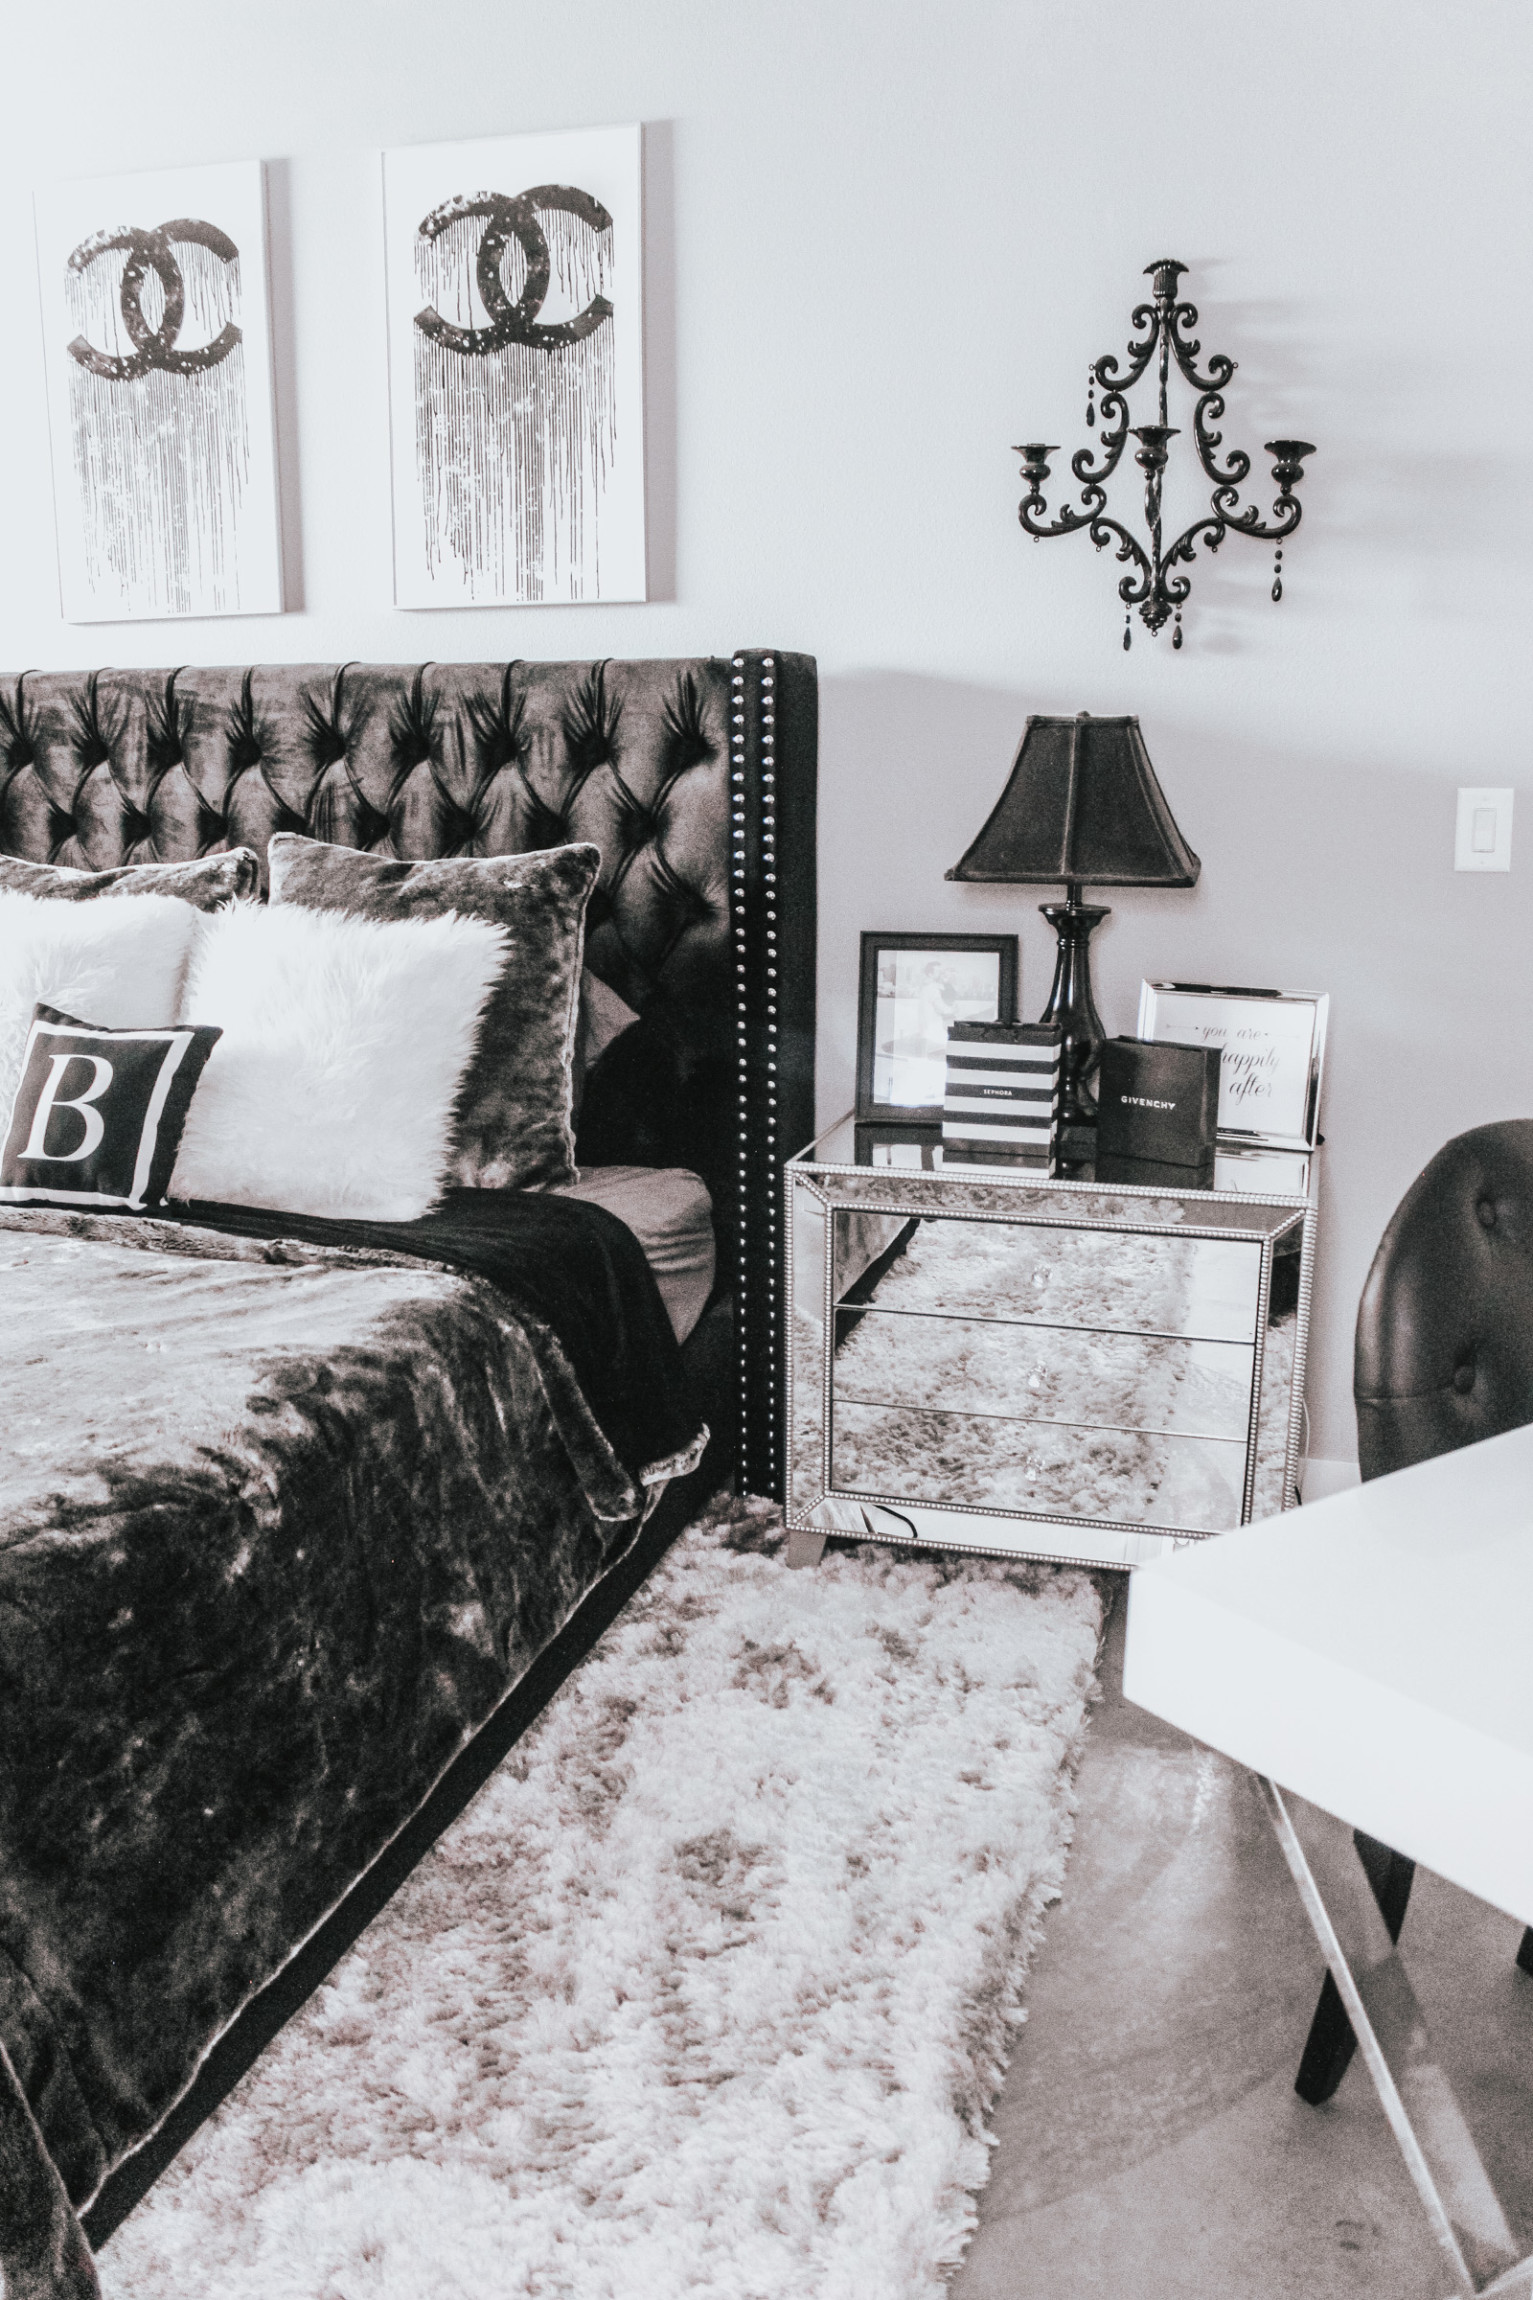 Chic Chanel Bedroom Decor | Chanel Prints | Black, White, & Grey Bedroom | Blondie in the City by Hayley Larue